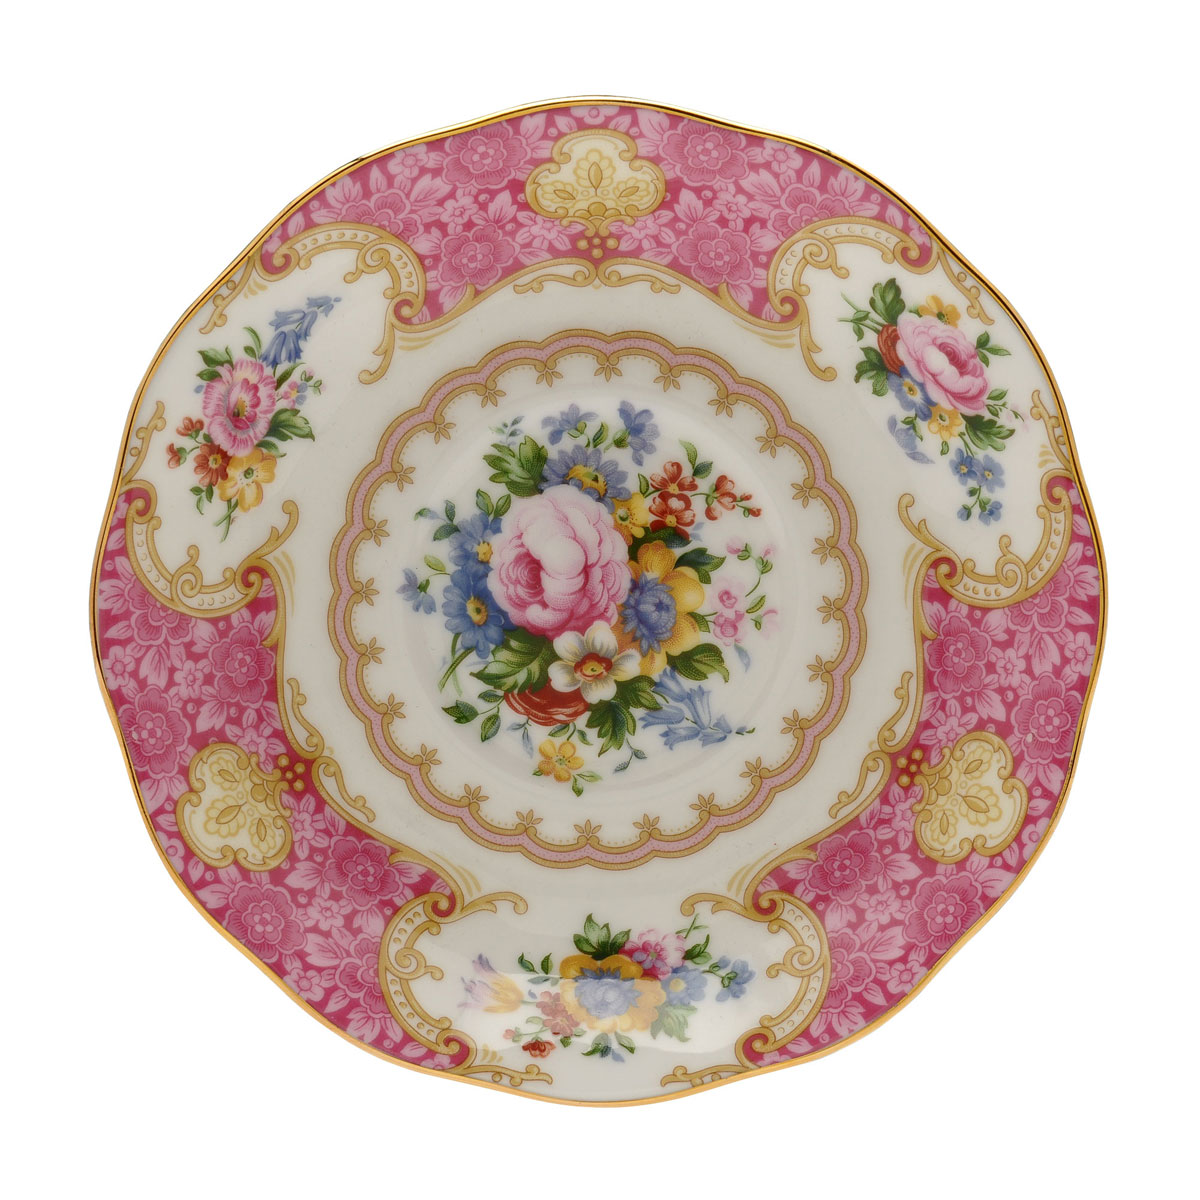 Royal Albert Lady Carlyle Bread and Butter Plate 6.3"